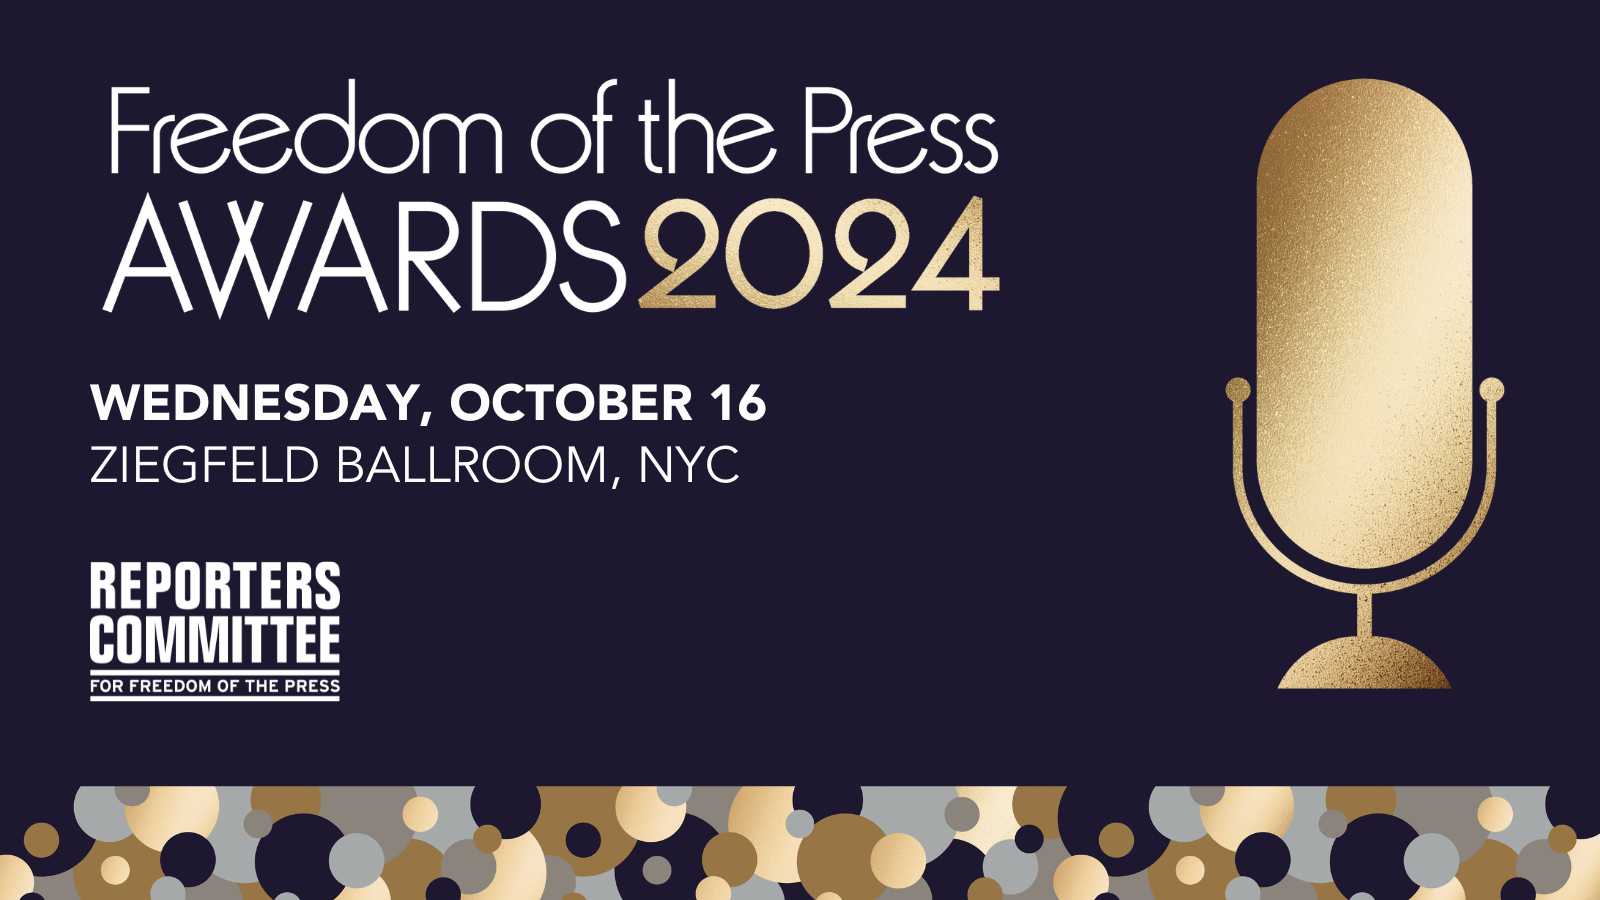 Dark purple image with a microphone icon that says "Freedom of the Press Awards 2024." The graphic has the date and location of the awards: Wednesday, October 16 at the Ziegfeld Ballroom in New York City. The image has the Reporters Committee's logo in the bottom left corner.